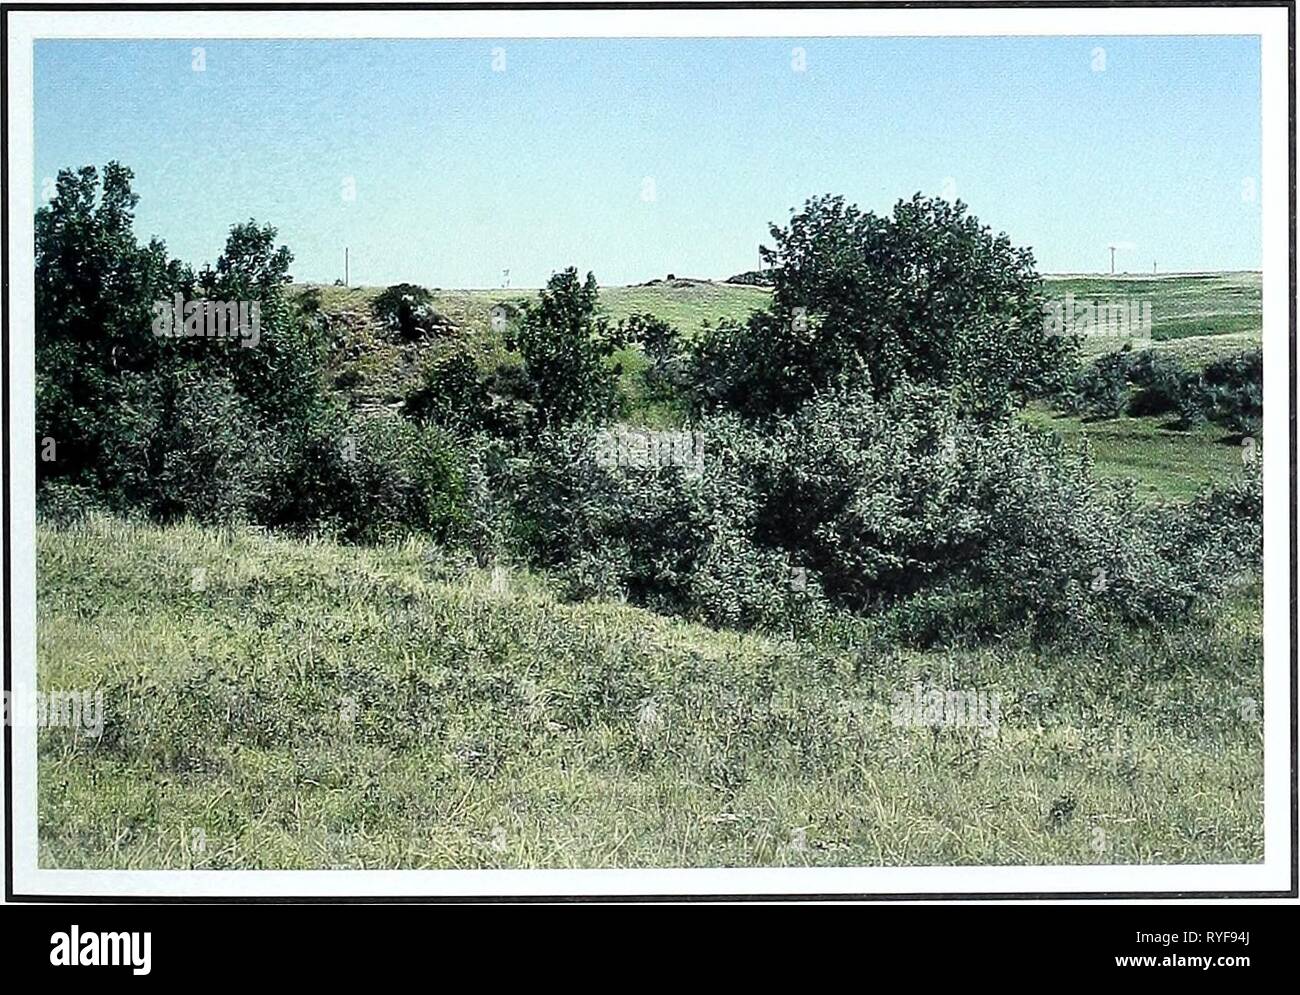 Eighty years of vegetation and landscape changes in the Northern Great Plains : a photographic record  eightyyearsofveg45klem Year: 2001  Fryburg, North Dakota Location Billings Co., ND; Sec. 8, R. 100 W., T. 139 N.; GPS-UTM 5191148 N, 627345 E. About 1.3 miles west-southwest of Fryburg. From Medora, South Dakota, travel 13 miles east on U.S. Interstate 94. Take Exit 36 and turn right (south). Continue through Fryburg to 'T' in road, located about 0.4 mile south of town. Turn right (west) onto Sully Creek Road and travel 1.3 miles. Photopoint is in a swale about 50 yards north of the road. Des Stock Photo